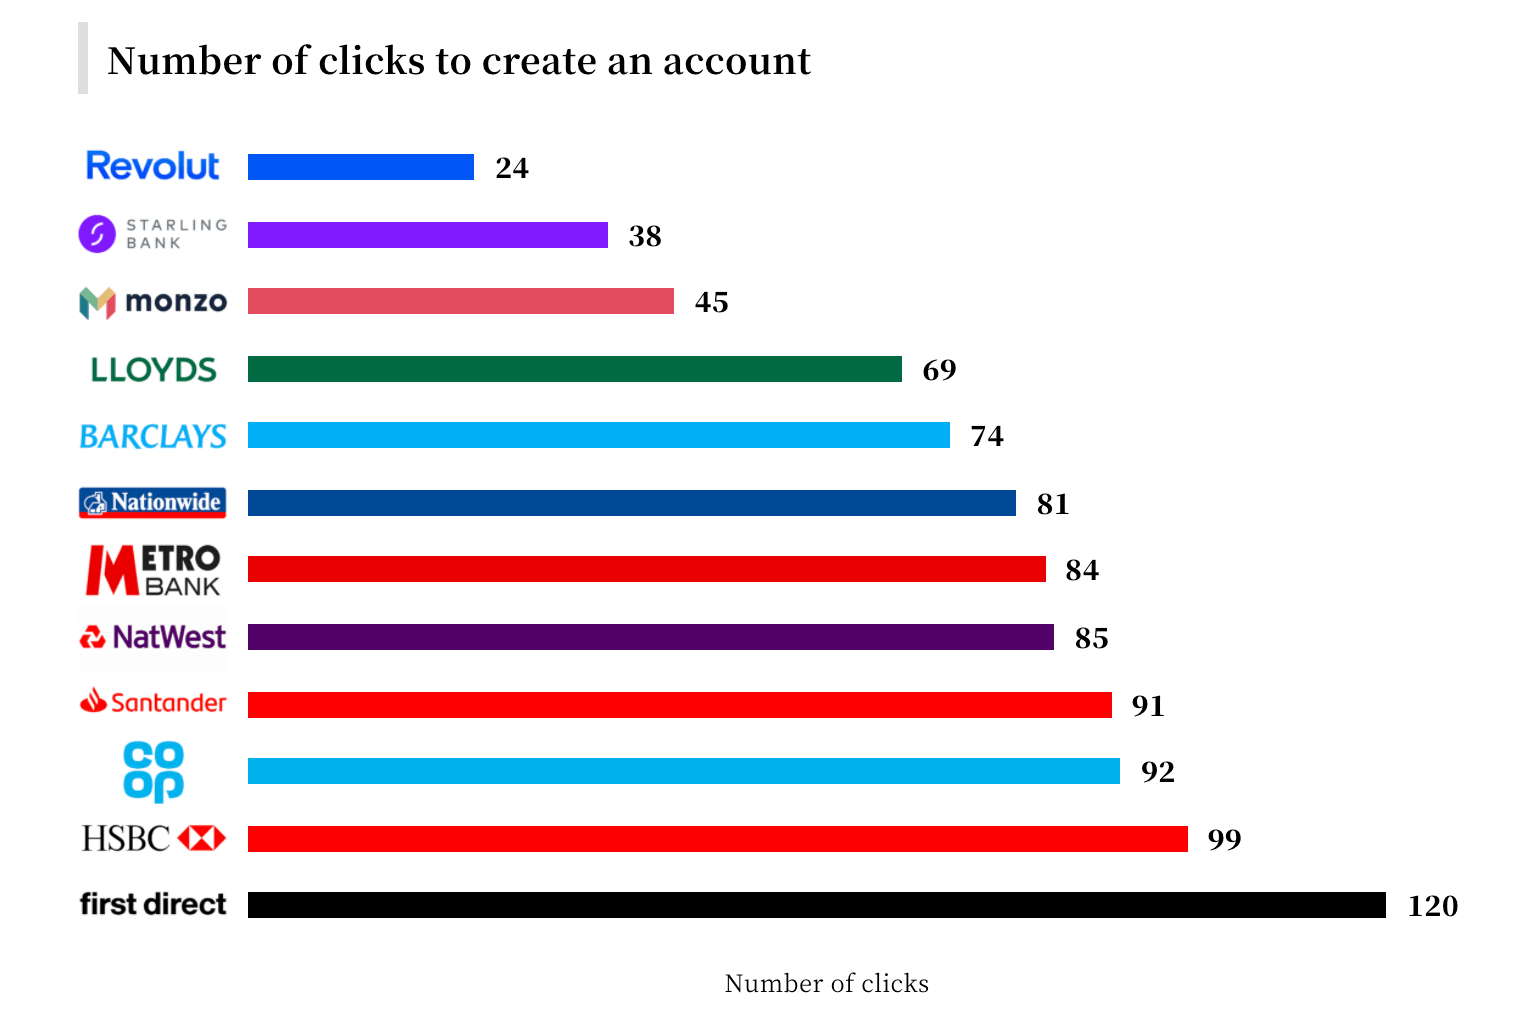 Number of clicks to create an account